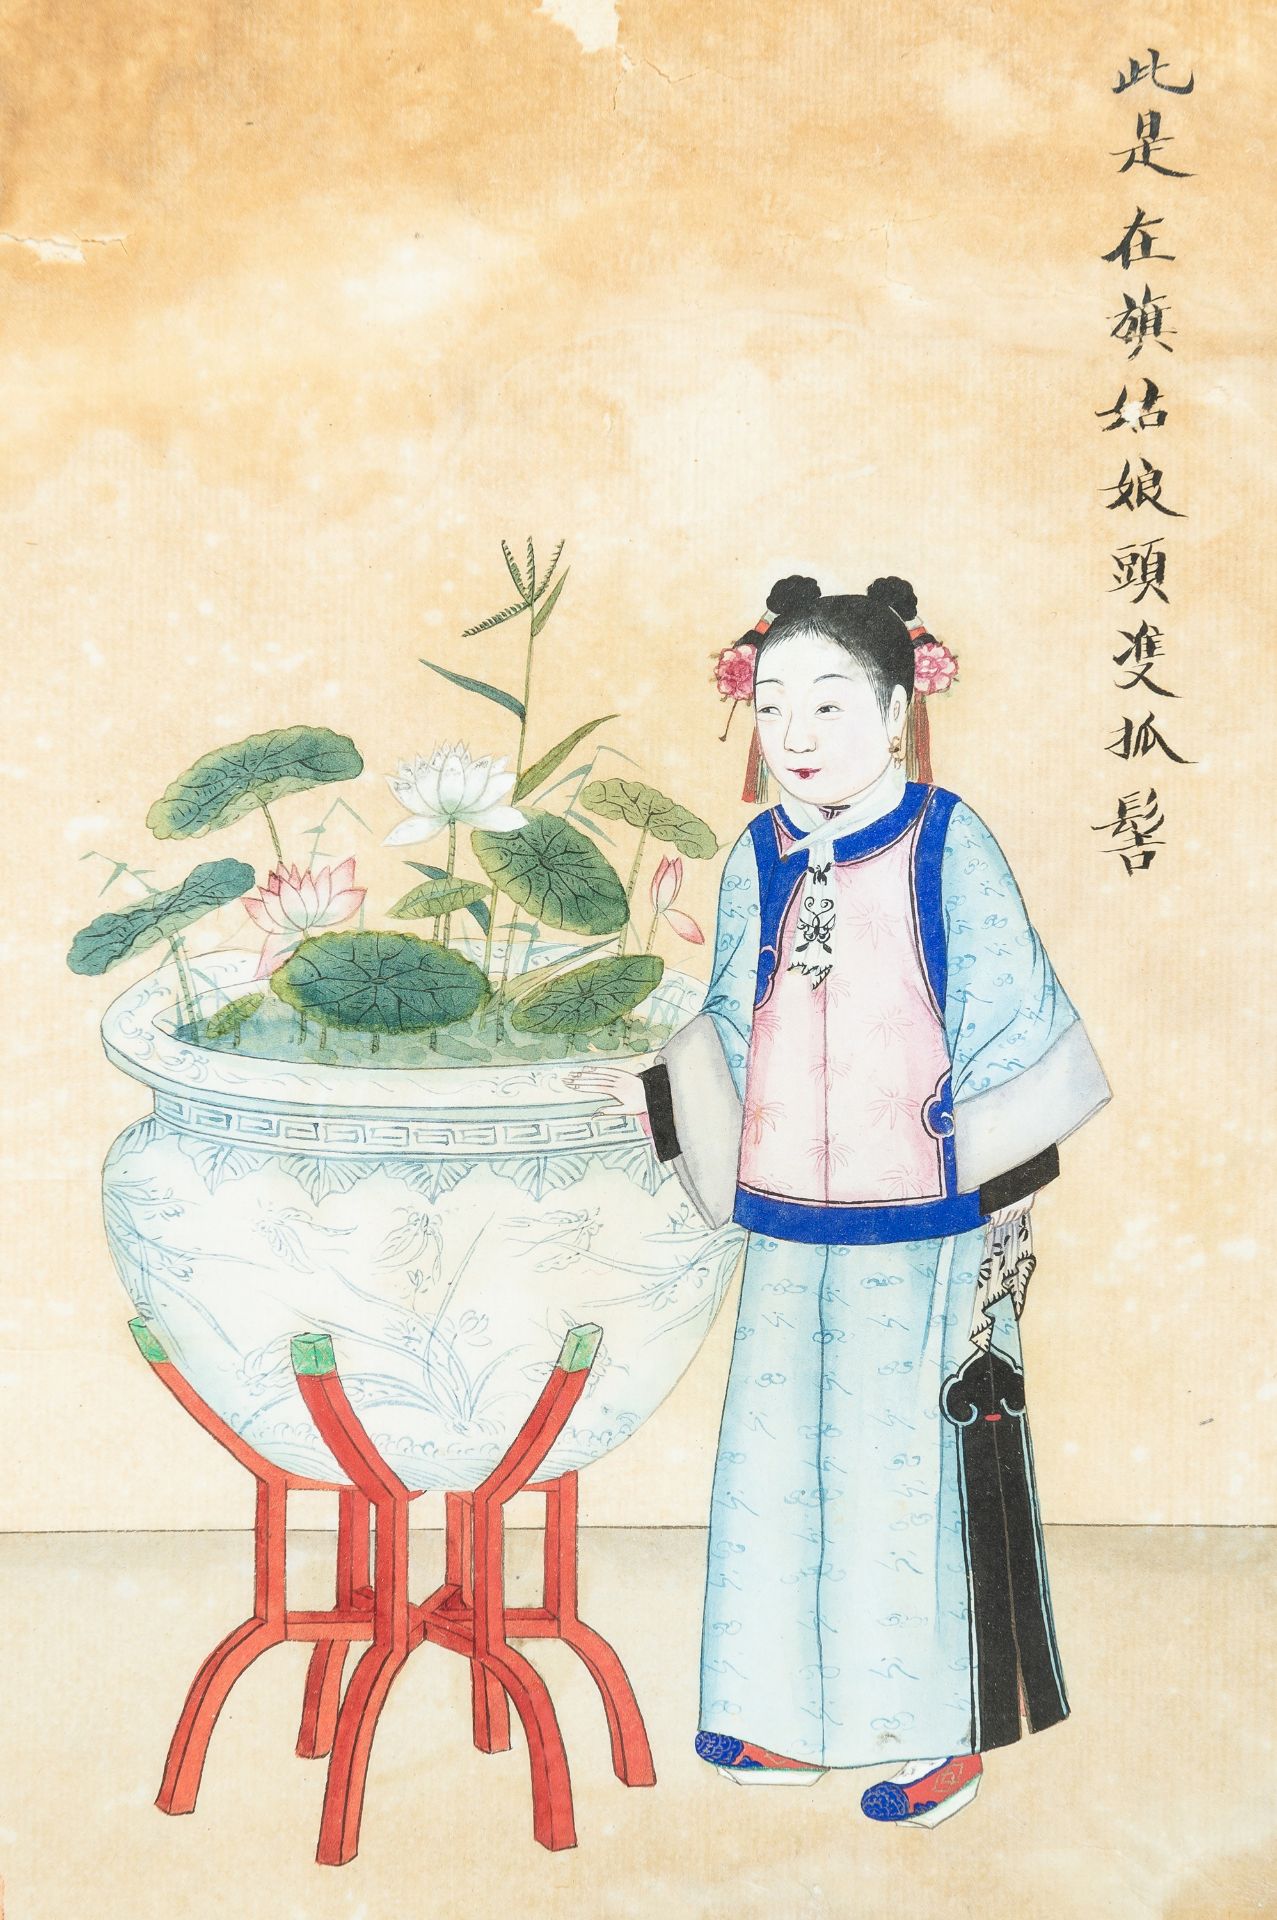 ZHOU PEI CHUN (active 1880-1910): A PAINTING OF A MANCHU COURT LADY BY A FISHBOWL, 1900s